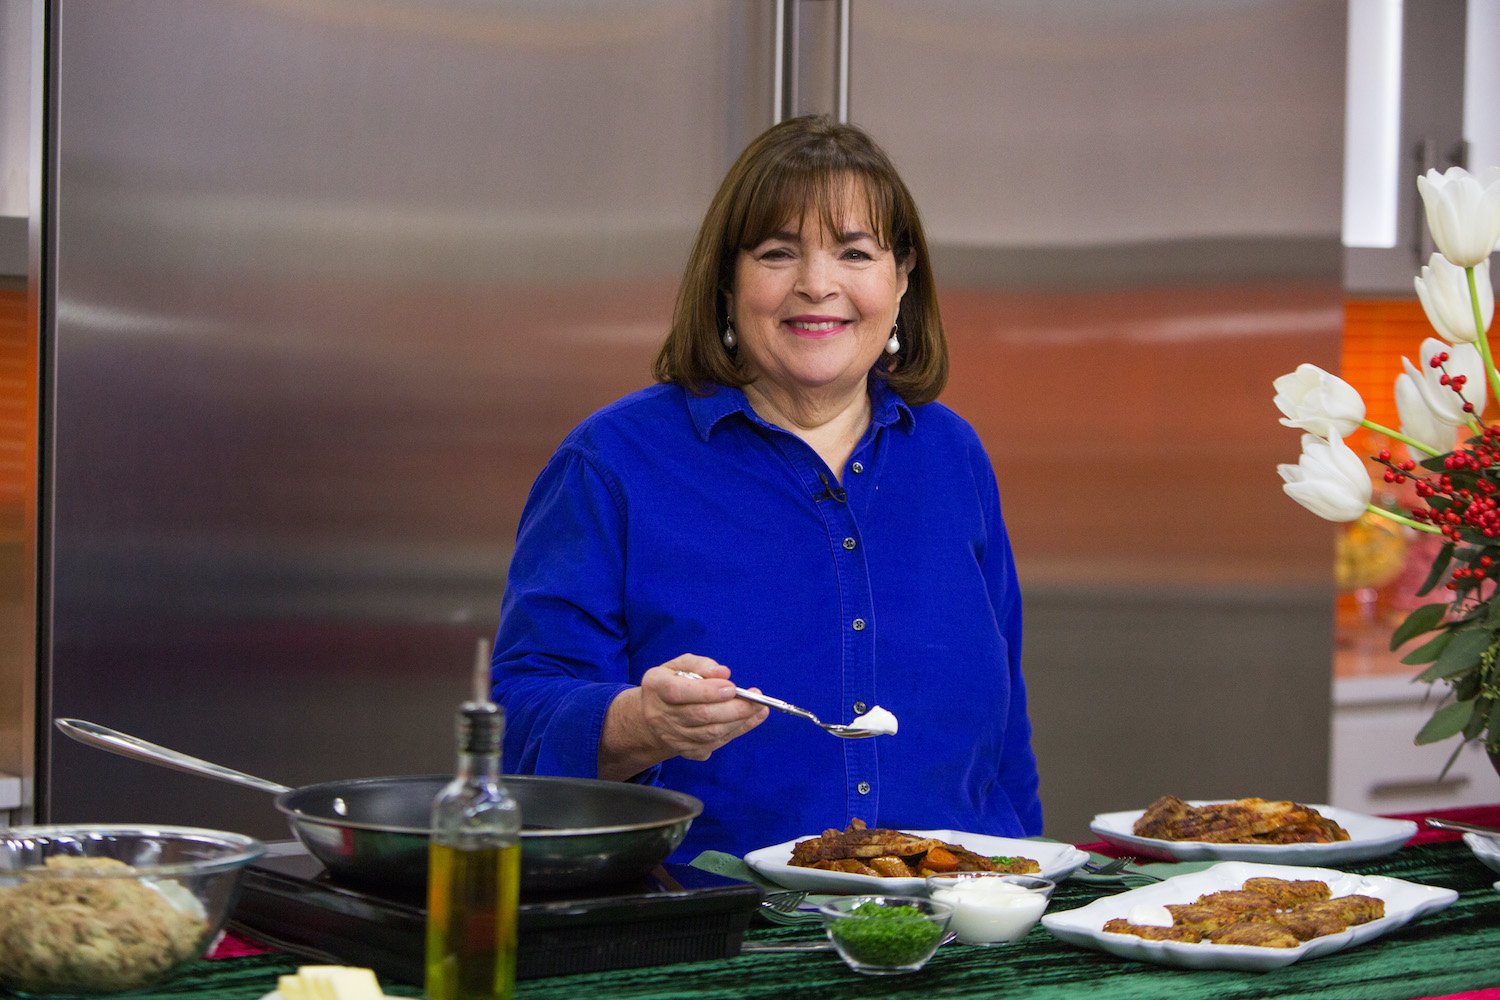 'Barefoot Contessa' Ina Garten smiles during a segment on the 'Today' show in 2017